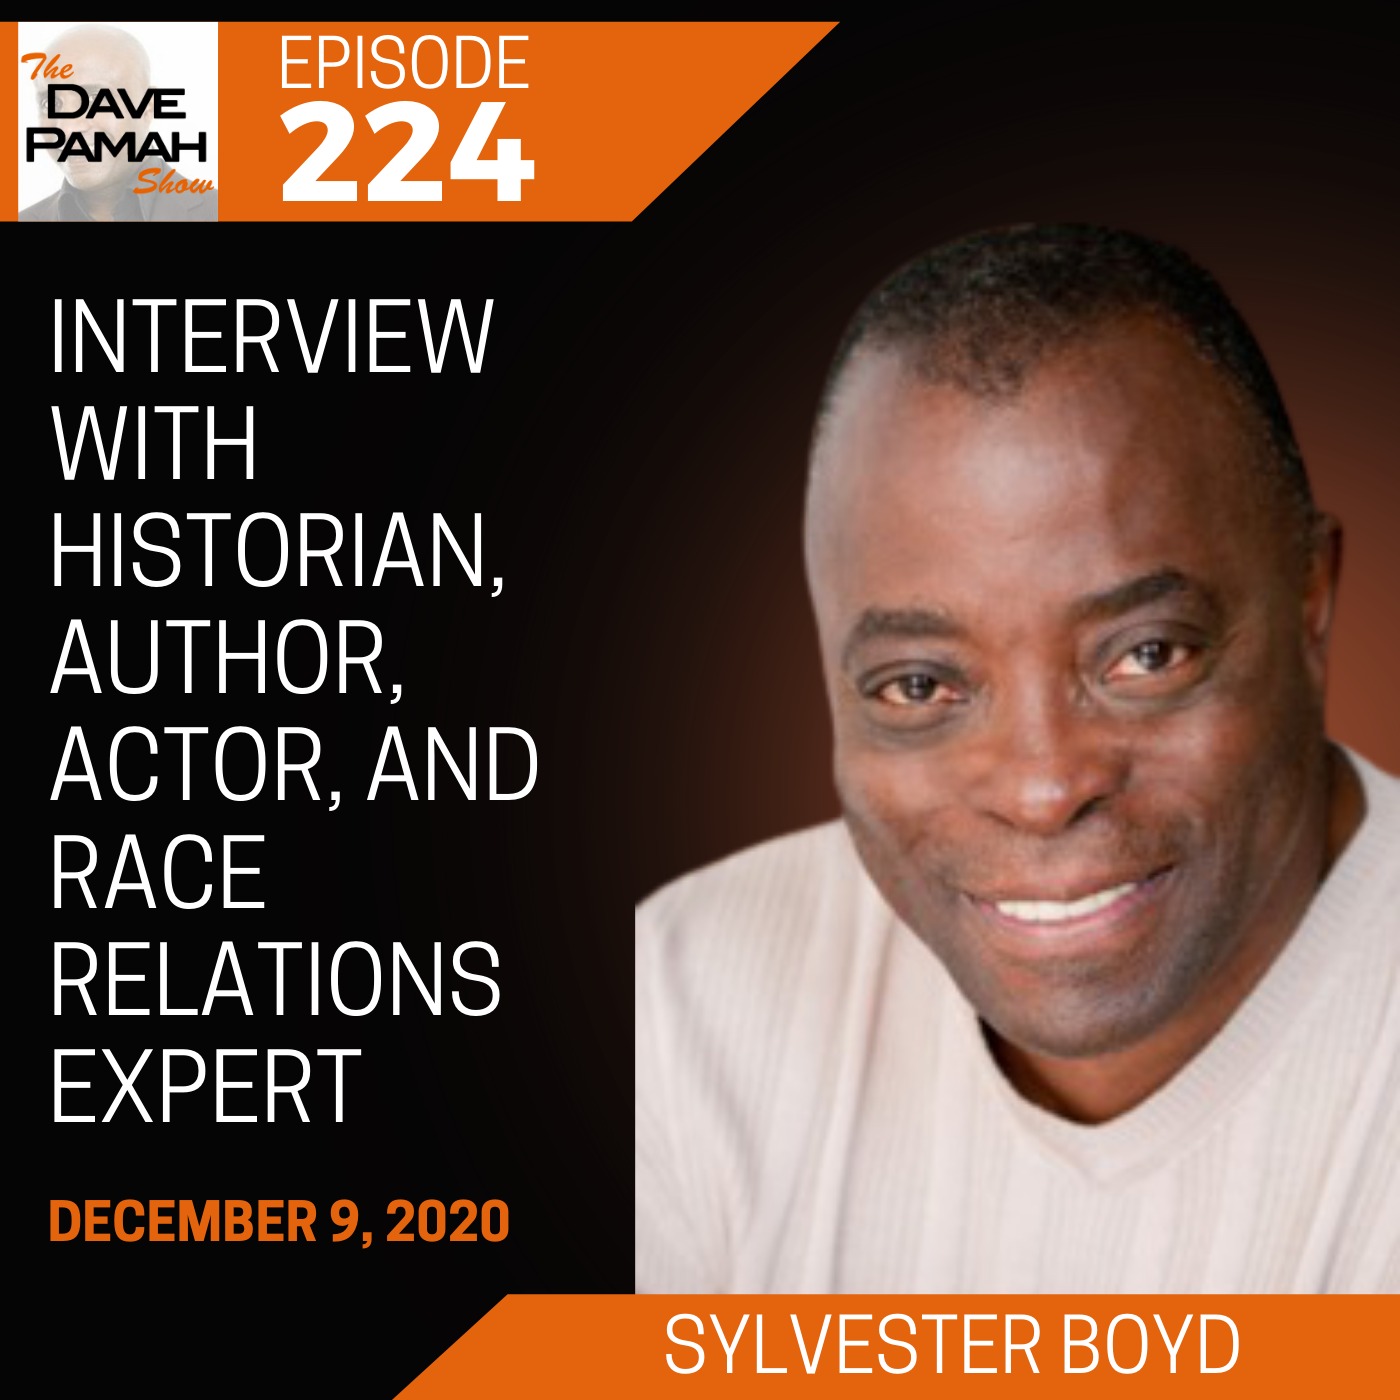 Interview with Historian, Author, Actor, and Race Relations Expert Sylvester Boyd